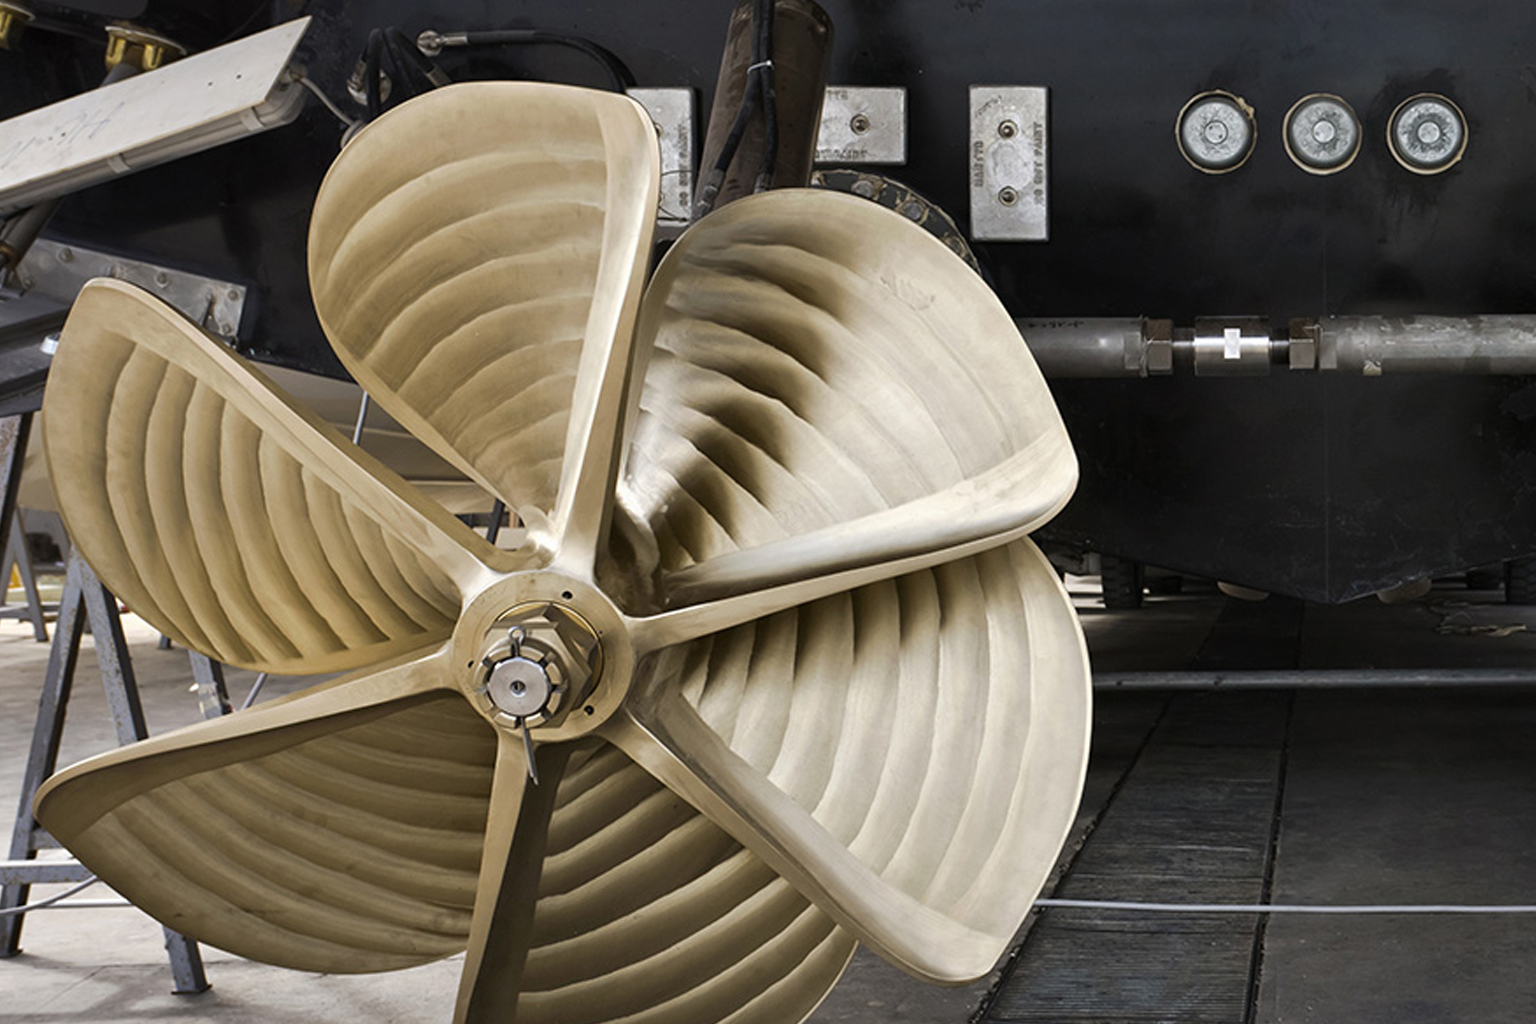 Propeller Repair and Alteration Services